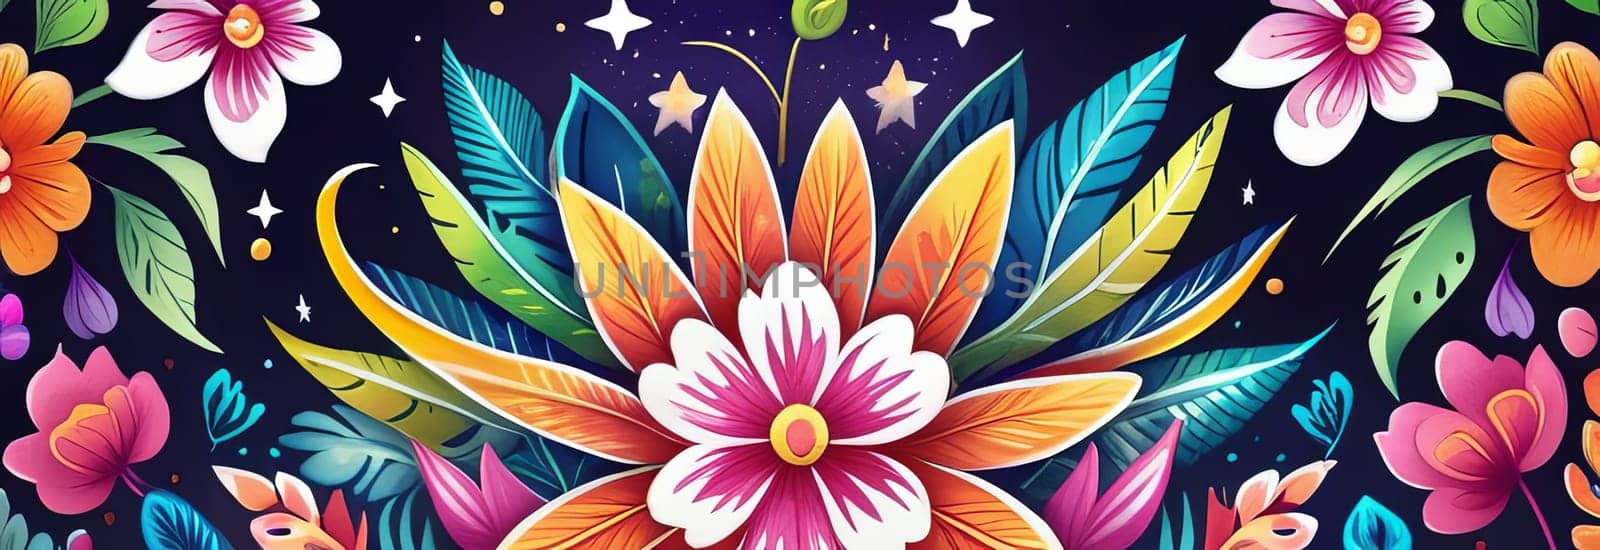 Striking, colorful flower painting with intricate details, vivid hues, beautifully contrasted against dark, black background. For interior design, textiles, clothing, gift wrapping, web design, print. by Angelsmoon